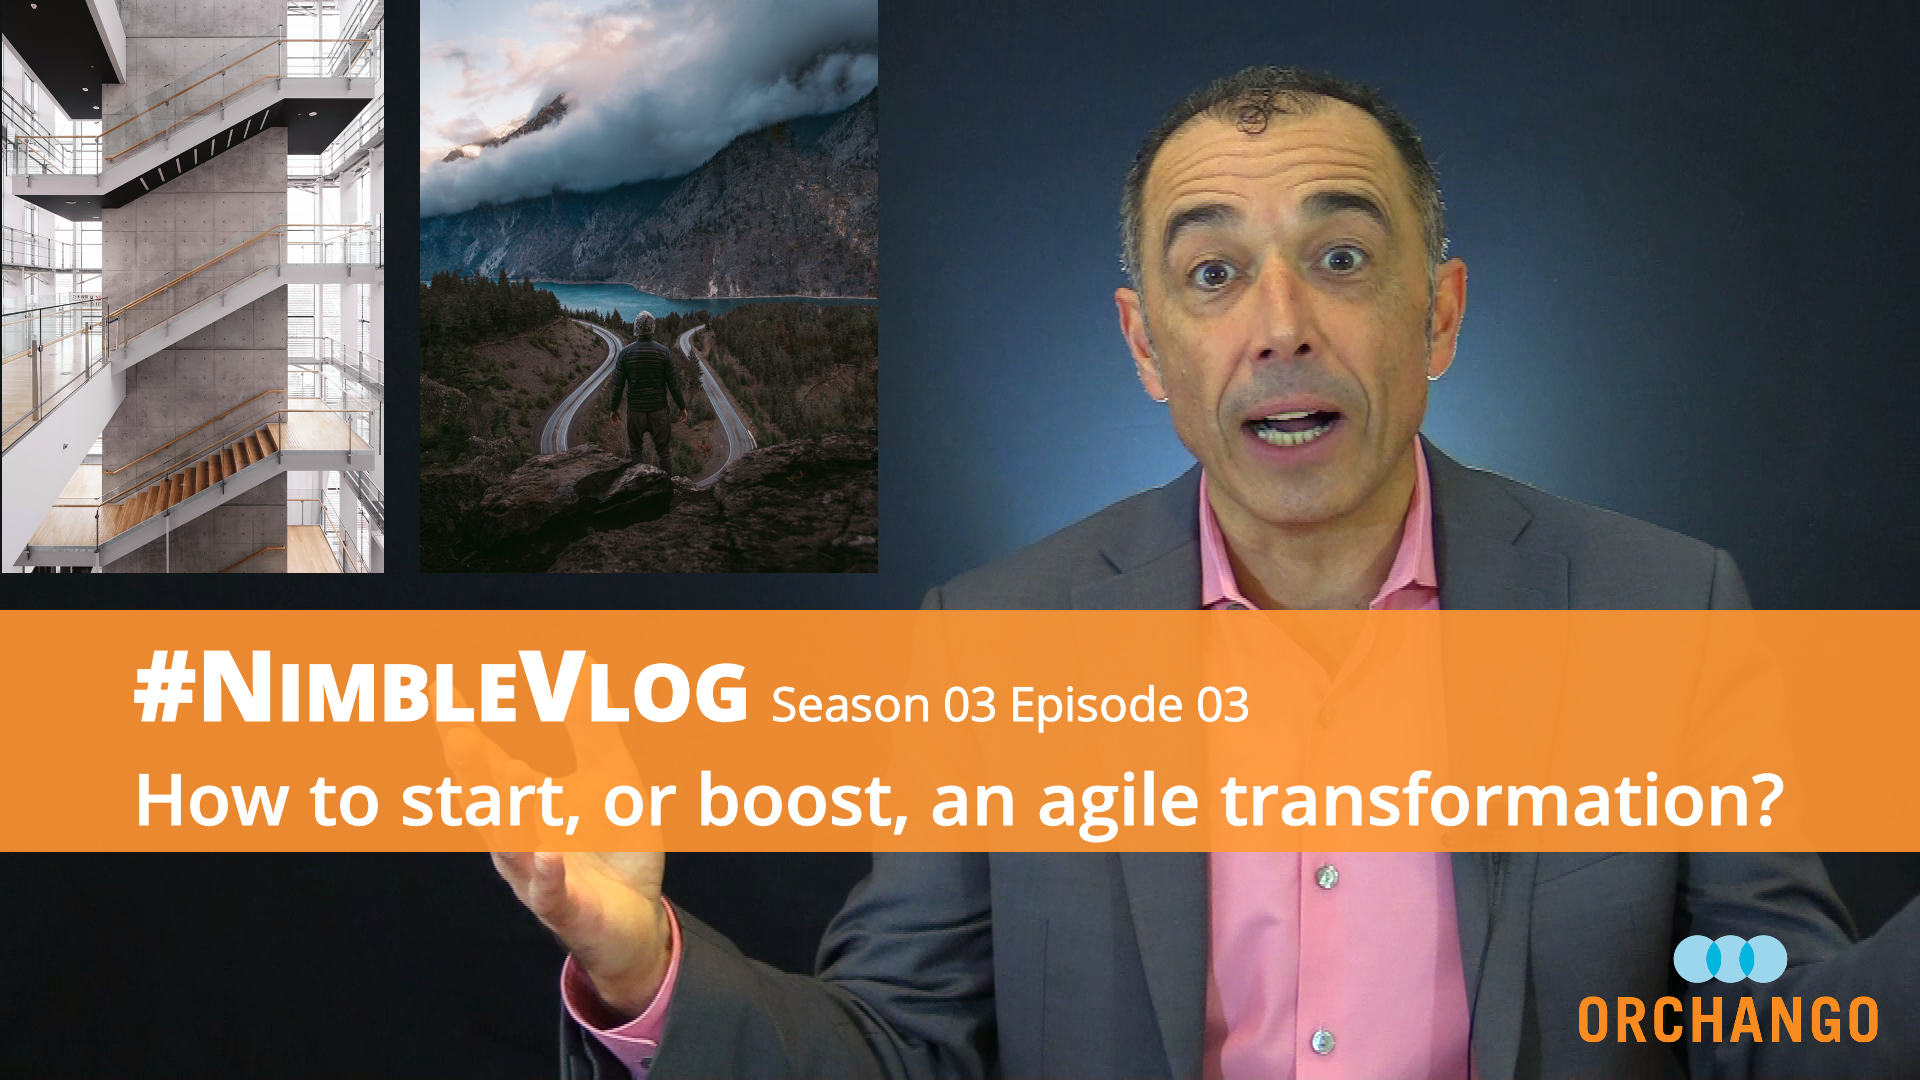 #NimbleVlog — S03 E03 How to start, or boost, an agile transformation